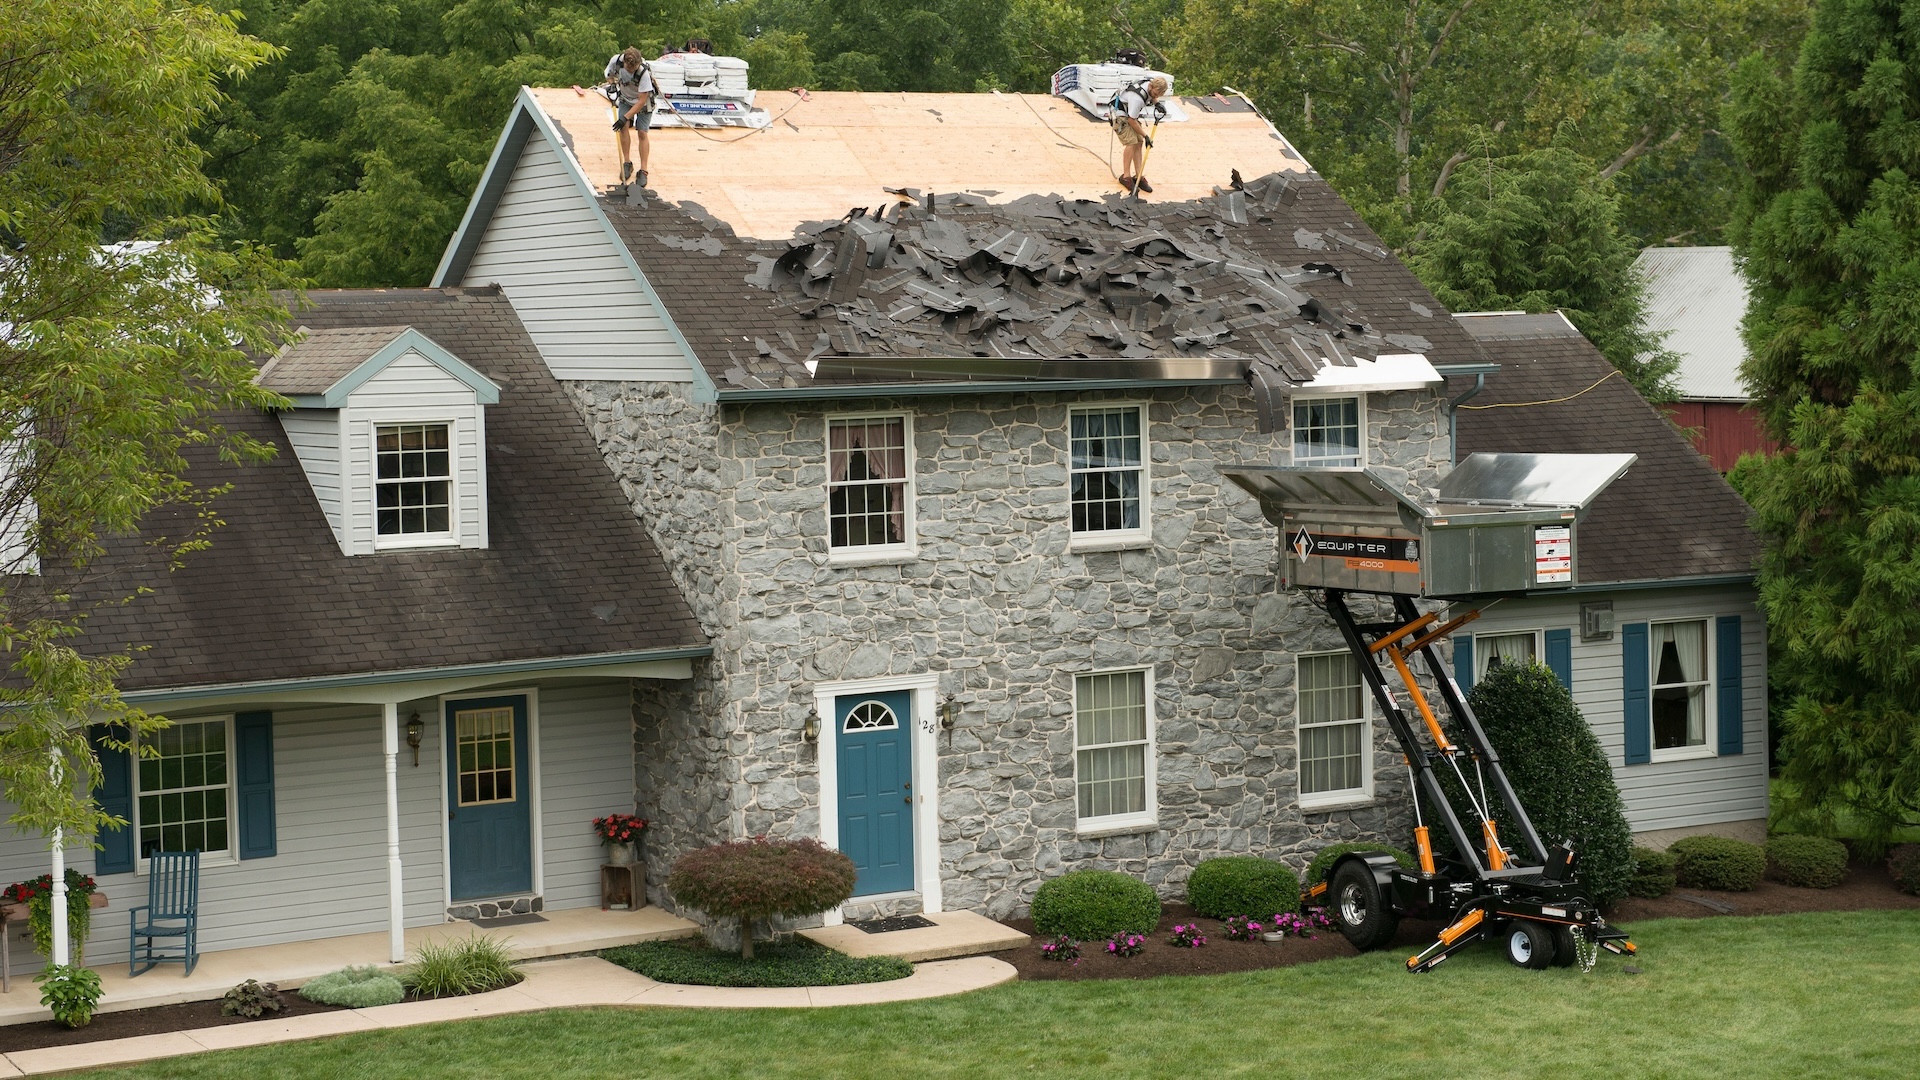 Residential roofers in safety gear feed rooftop debris into Equipter RB4000 during tearoff